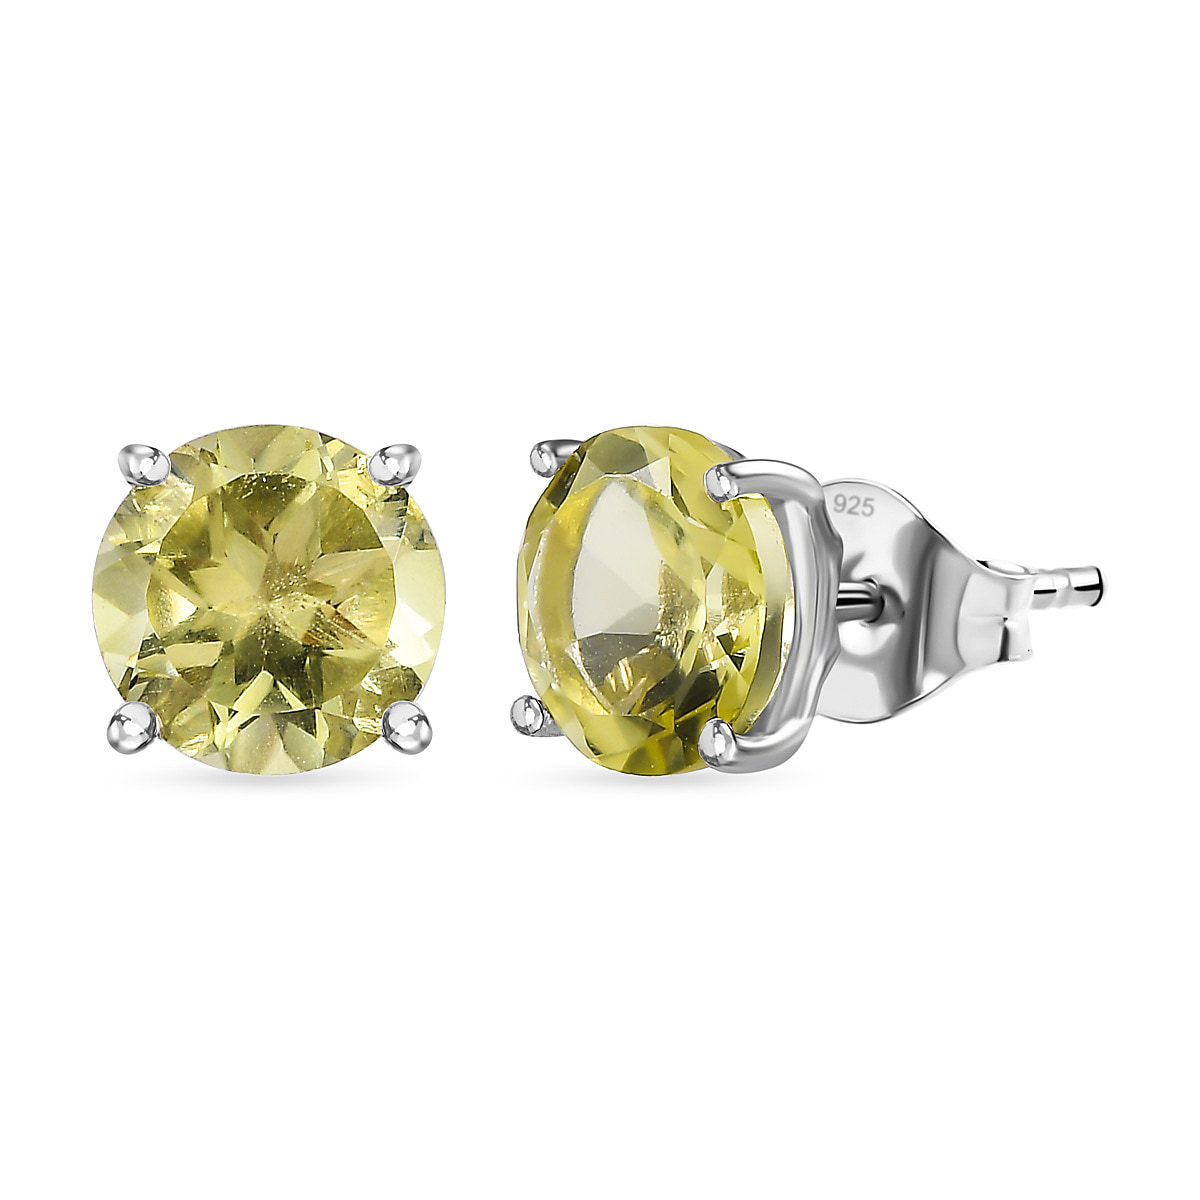 Green Gold Quartz Solitaire Earrings in Platinum Overlay Sterling Silver 3.60 Ct.